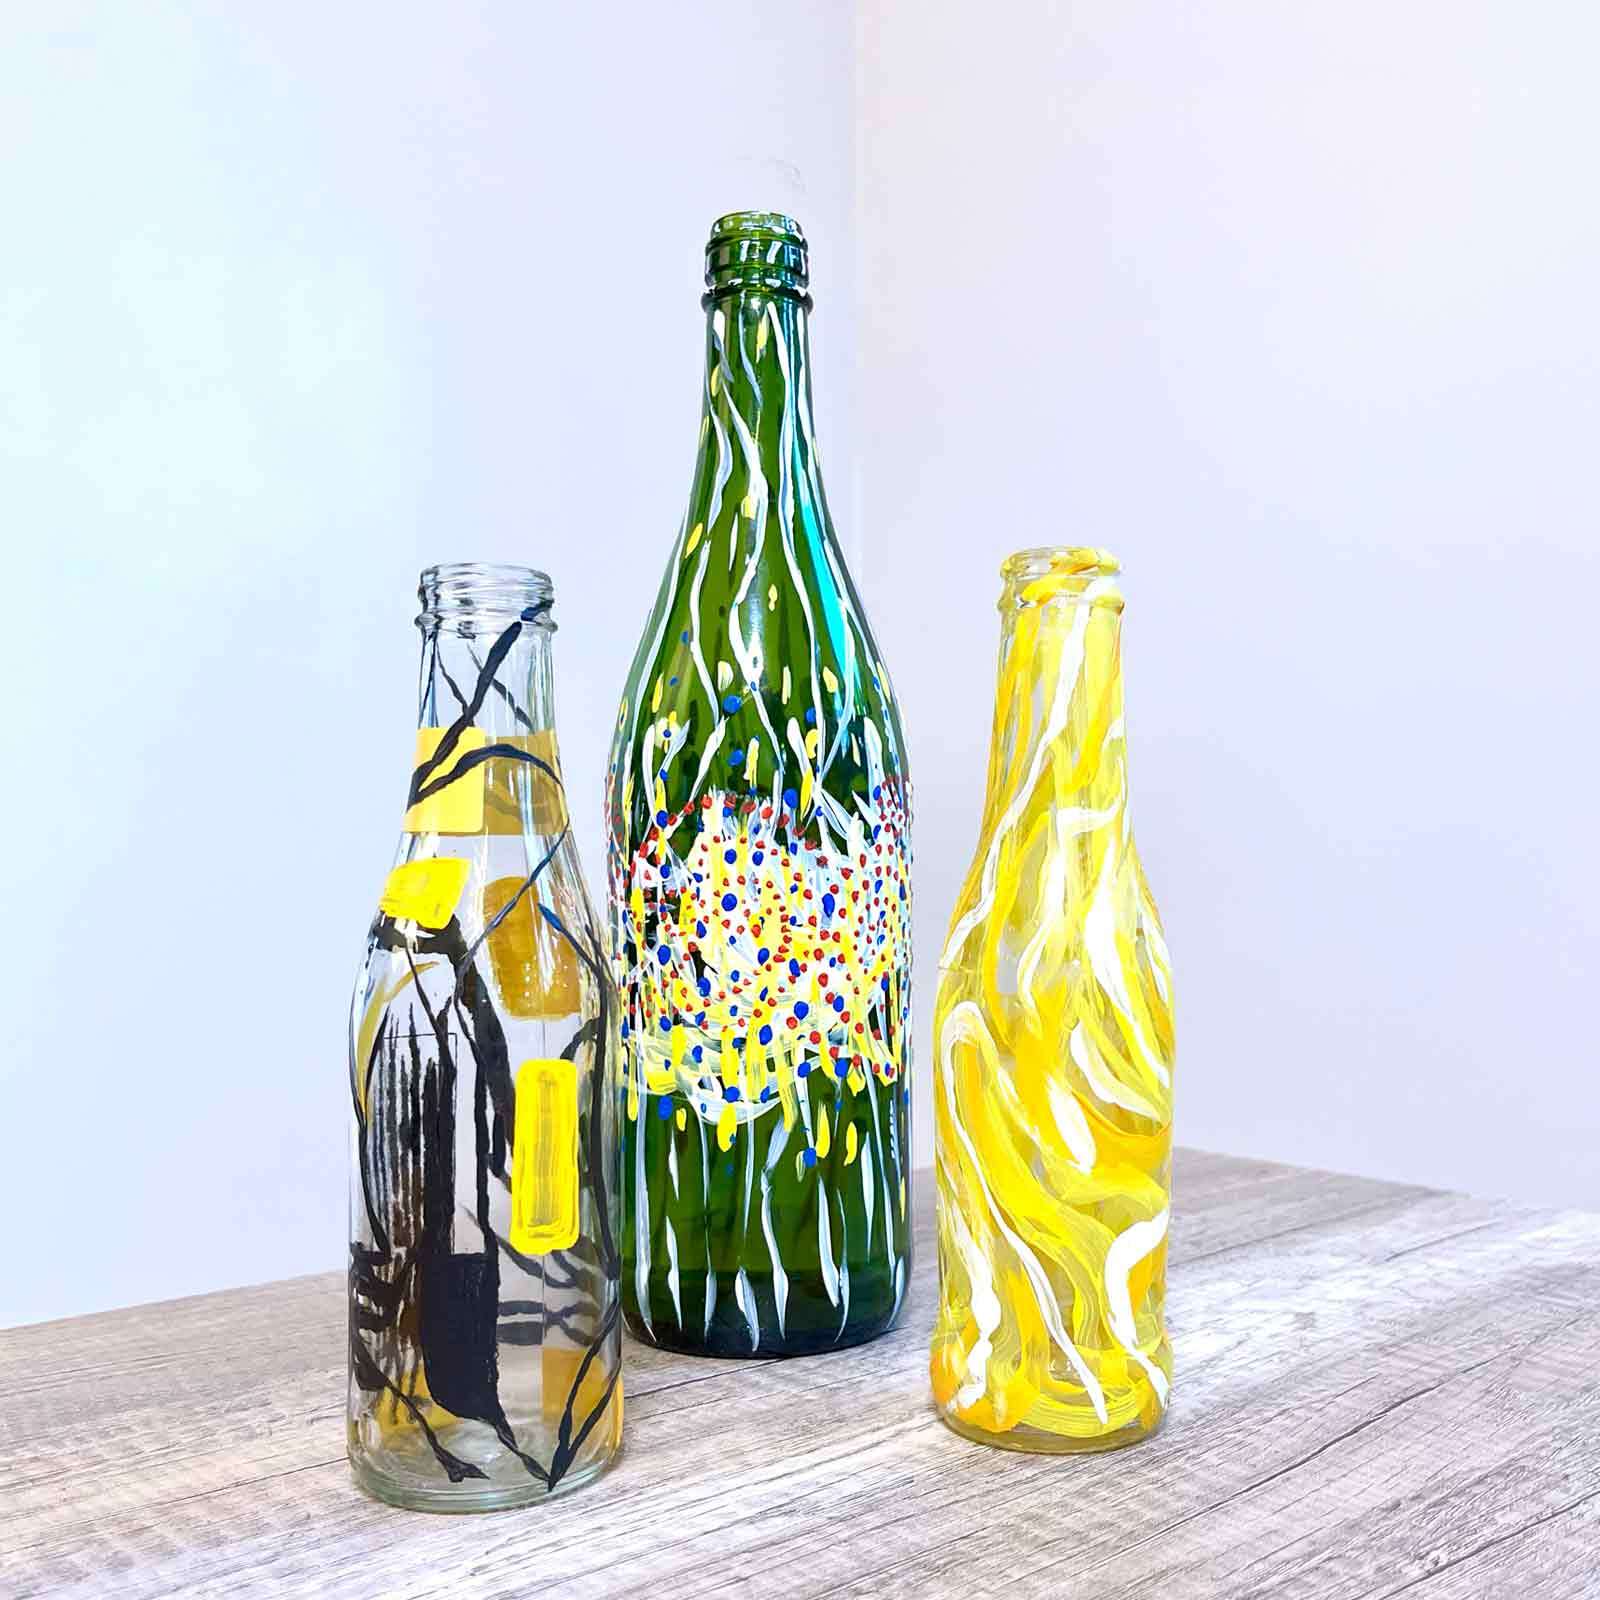 Check out these three vibrant, hand-painted glass bottles sitting on a rustic wooden table. They are perfectly contrasted against a sleek gray backdrop.